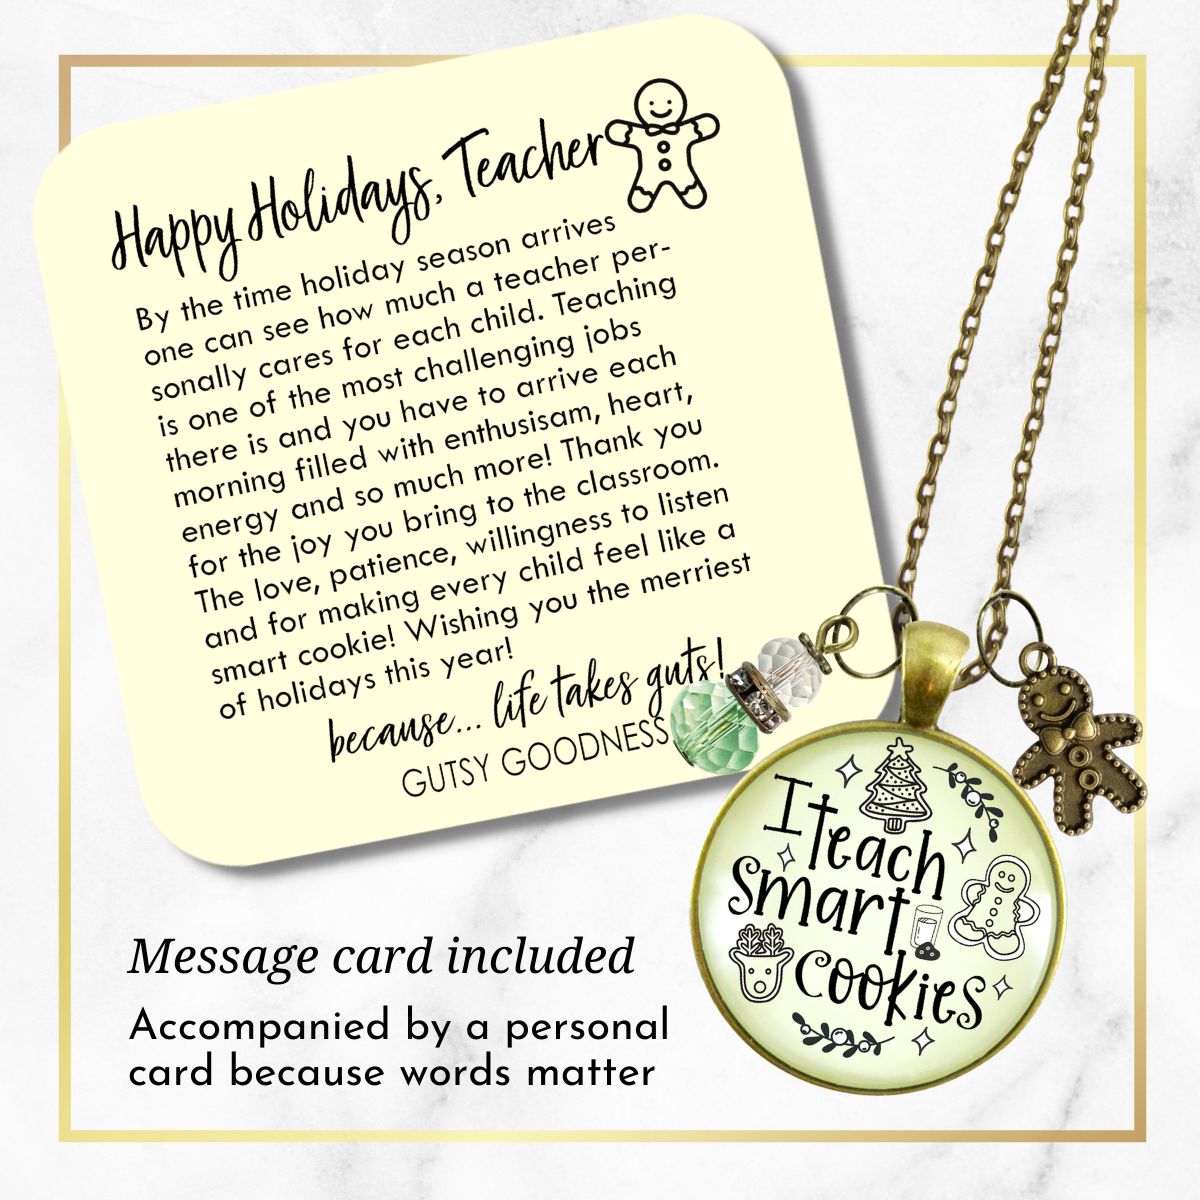 Happy Holidays Teacher Necklace I Teach Smart Cookies Gingerbread Charm Christmas Gift From Student Jewelry  Necklace - Gutsy Goodness Handmade Jewelry